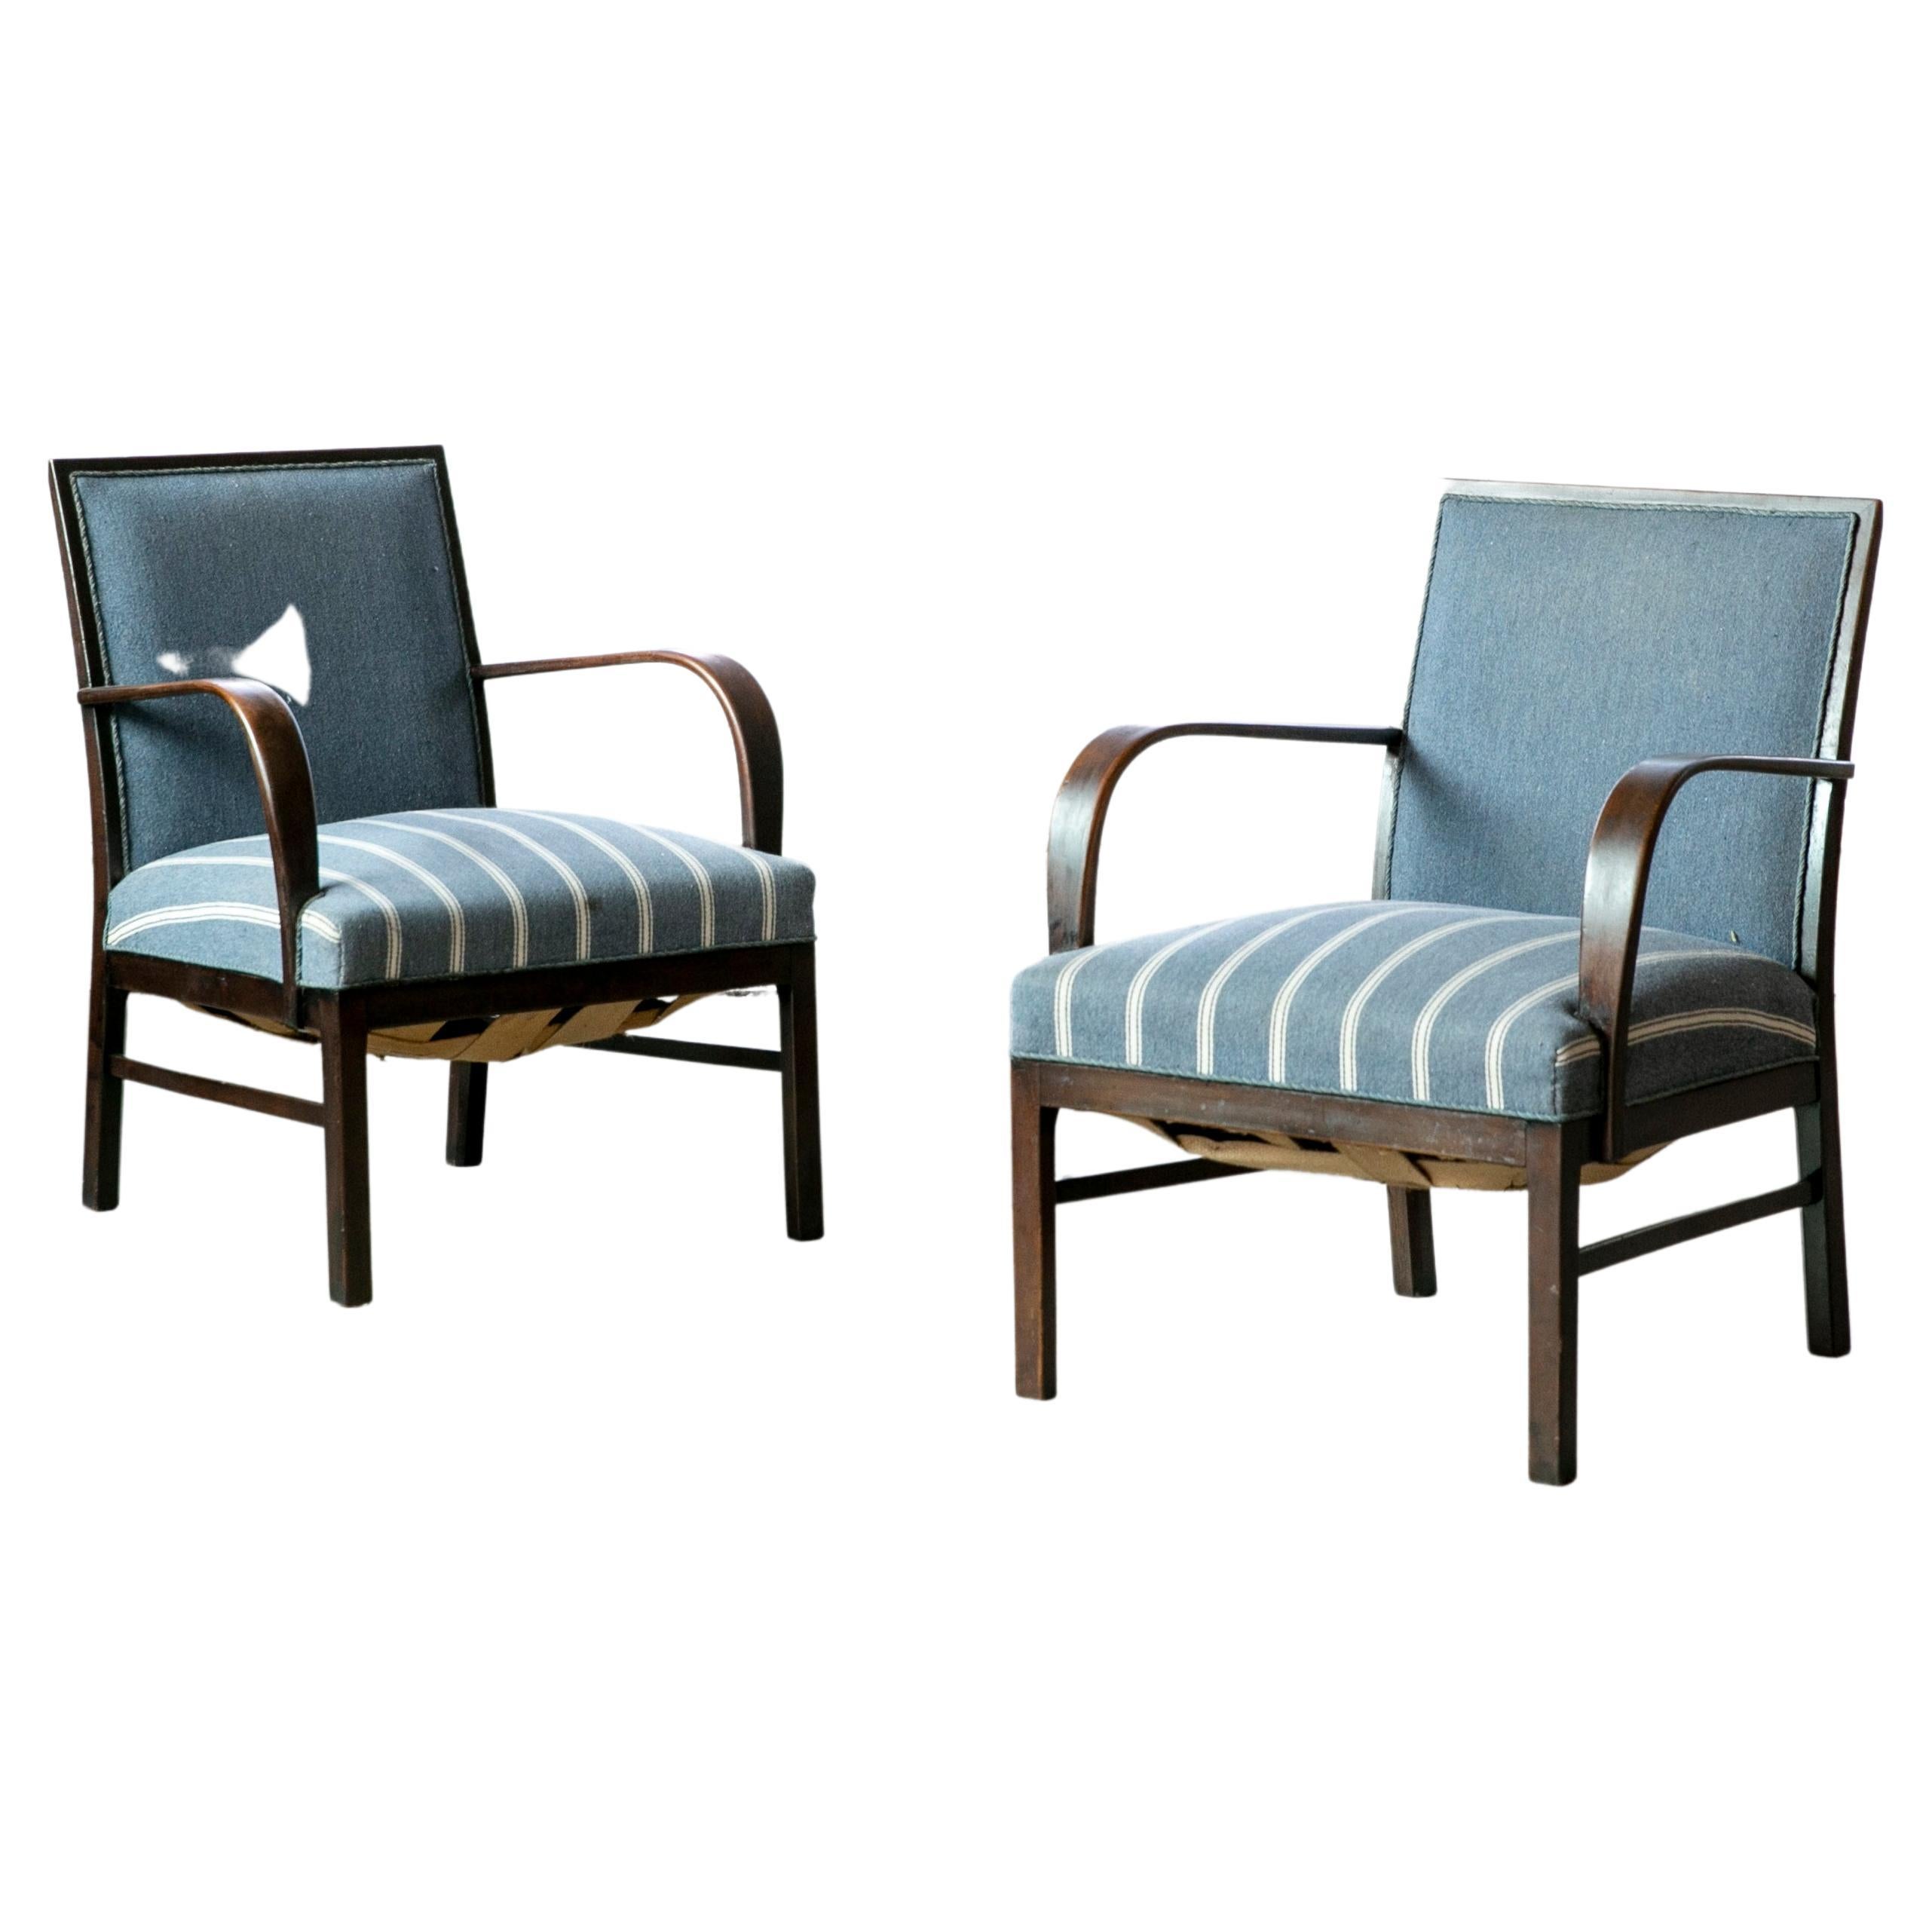 Pair of Danish Early Midcentury or Art Deco Low Lounge Chairs Mahagony, 1940's For Sale